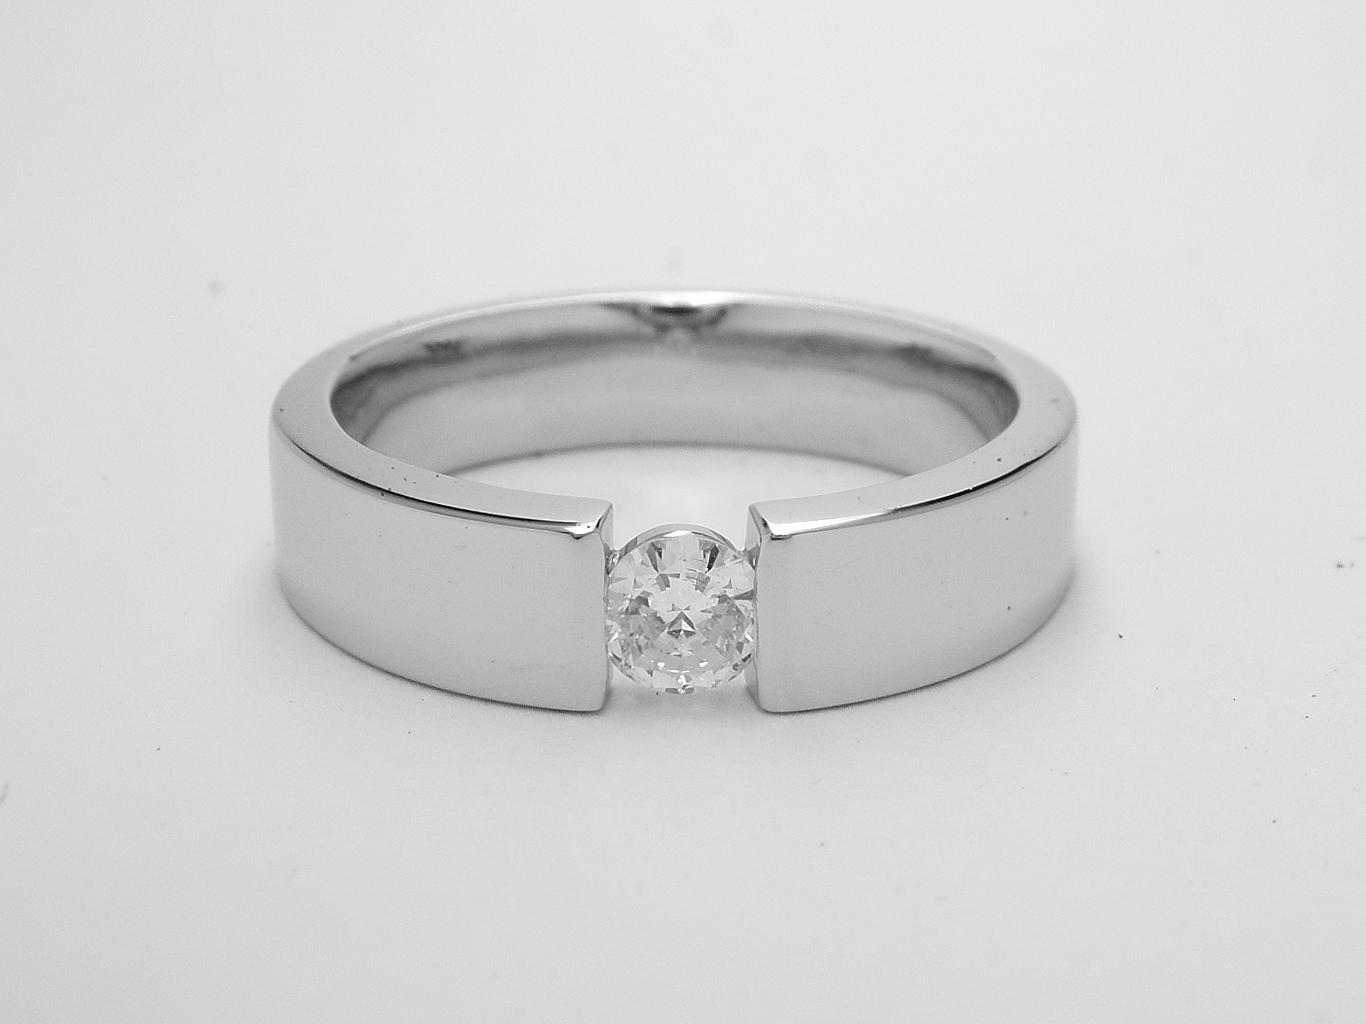 A single stone round brilliant cut diamond ring styled with the illusion of being tension set and mounted in platinum.